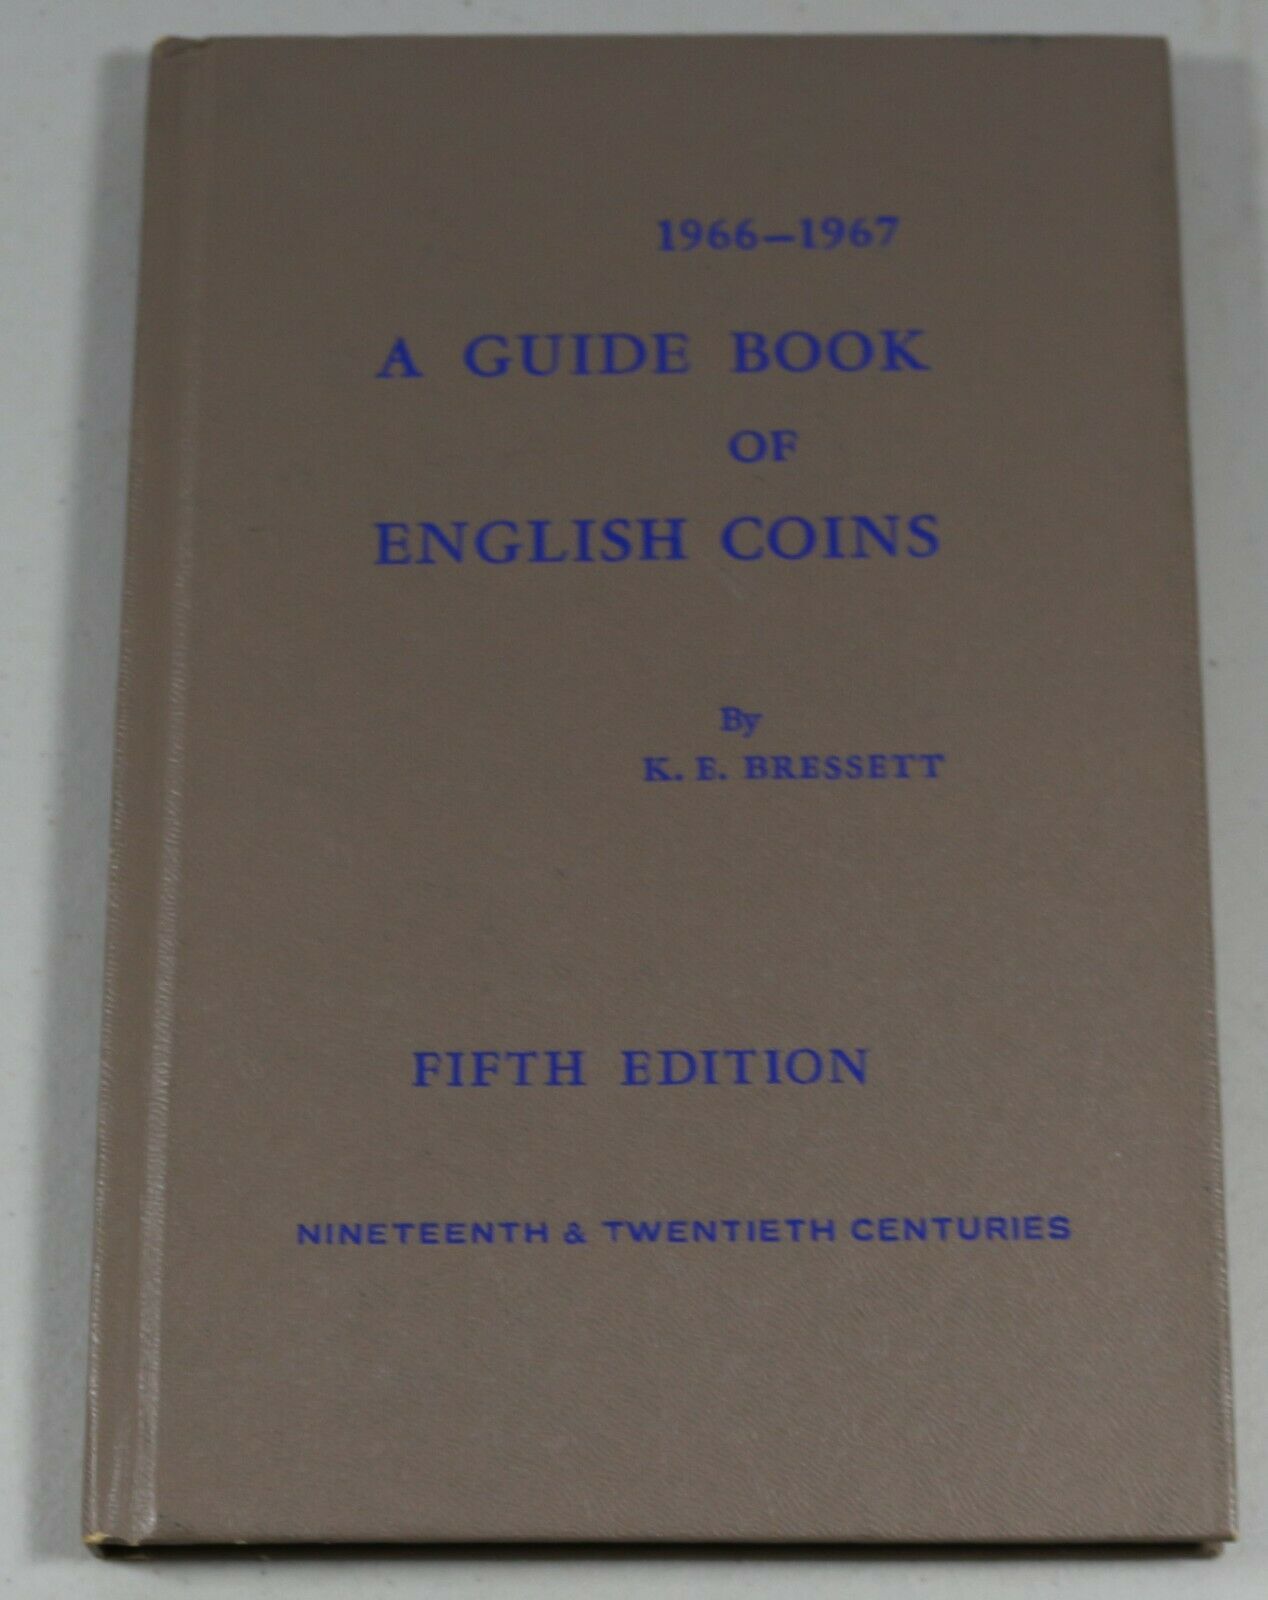 A Guide Book of English Coins by K.E. Bressett 5th Edition 1966-1967 - $10.60